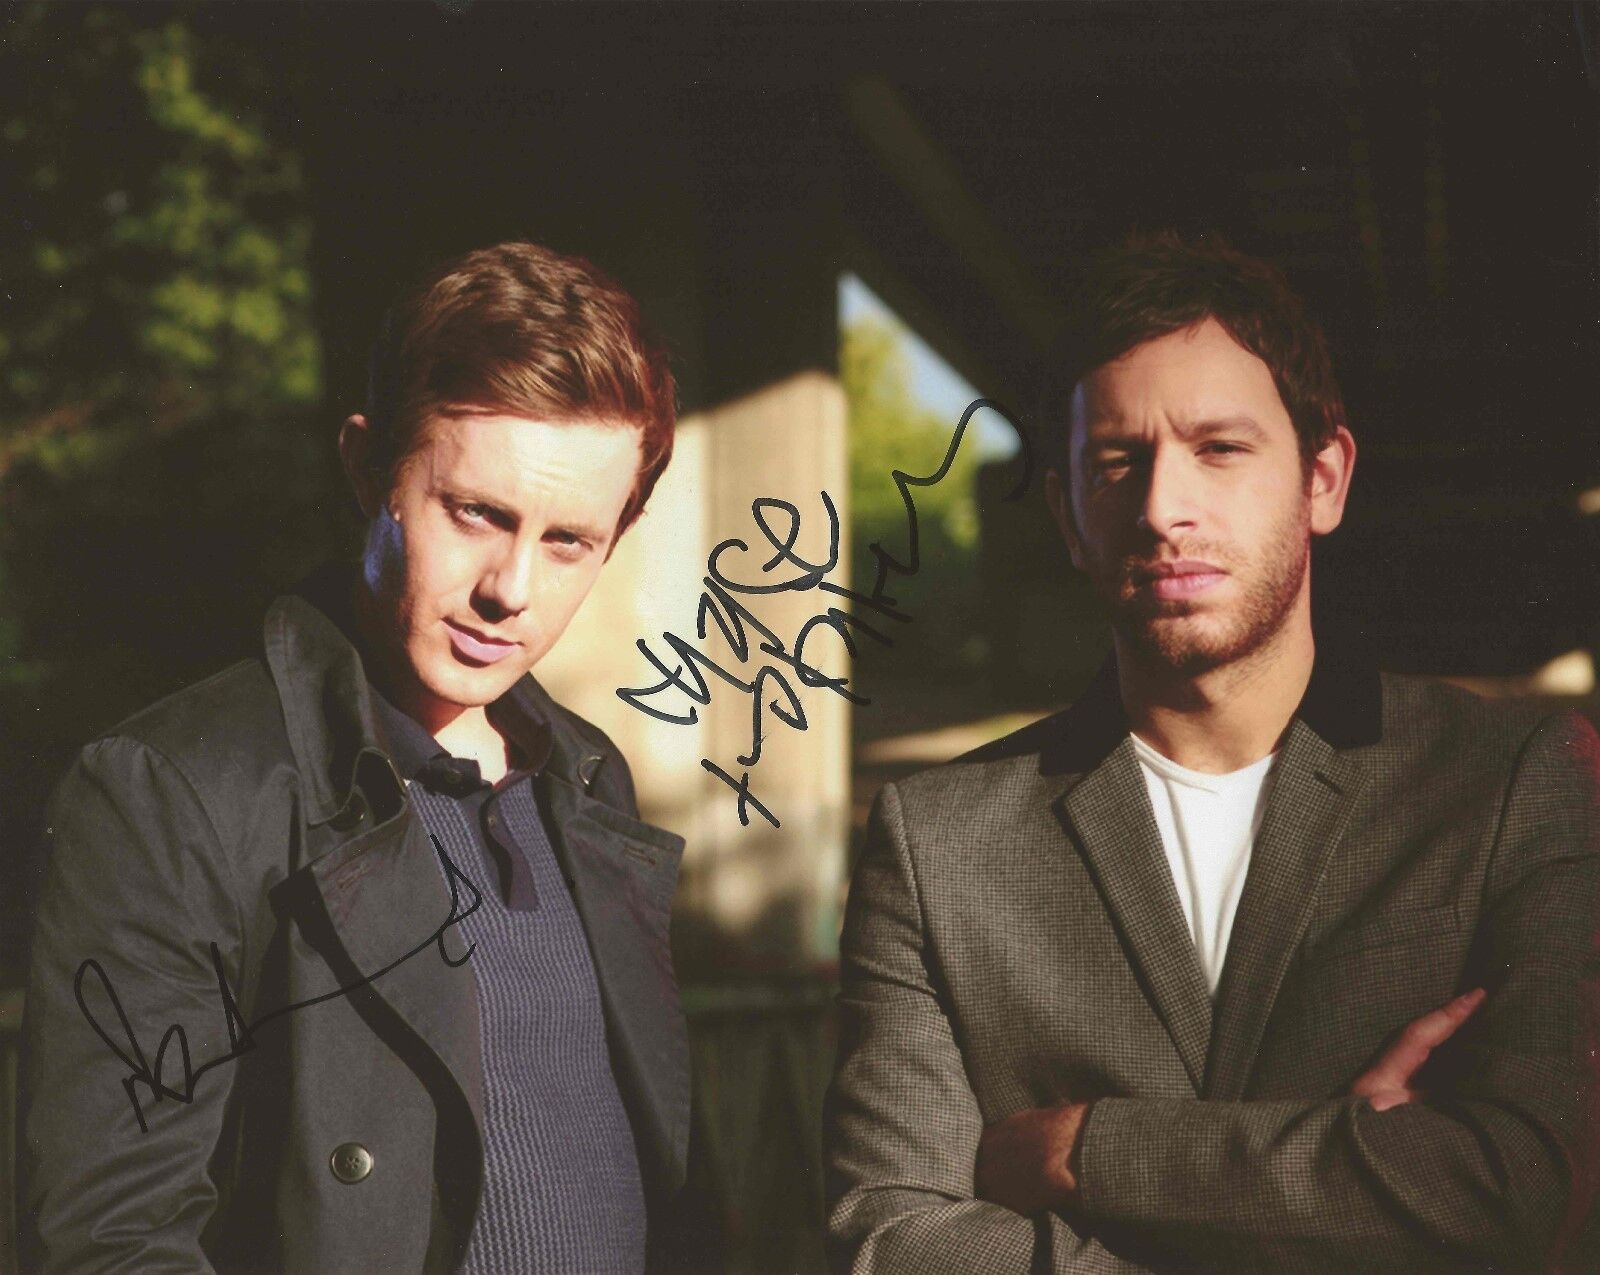 Chase & Status EDM duo REAL hand SIGNED 8x10 Photo Poster painting #5 Dubstep w/ COA Autographed